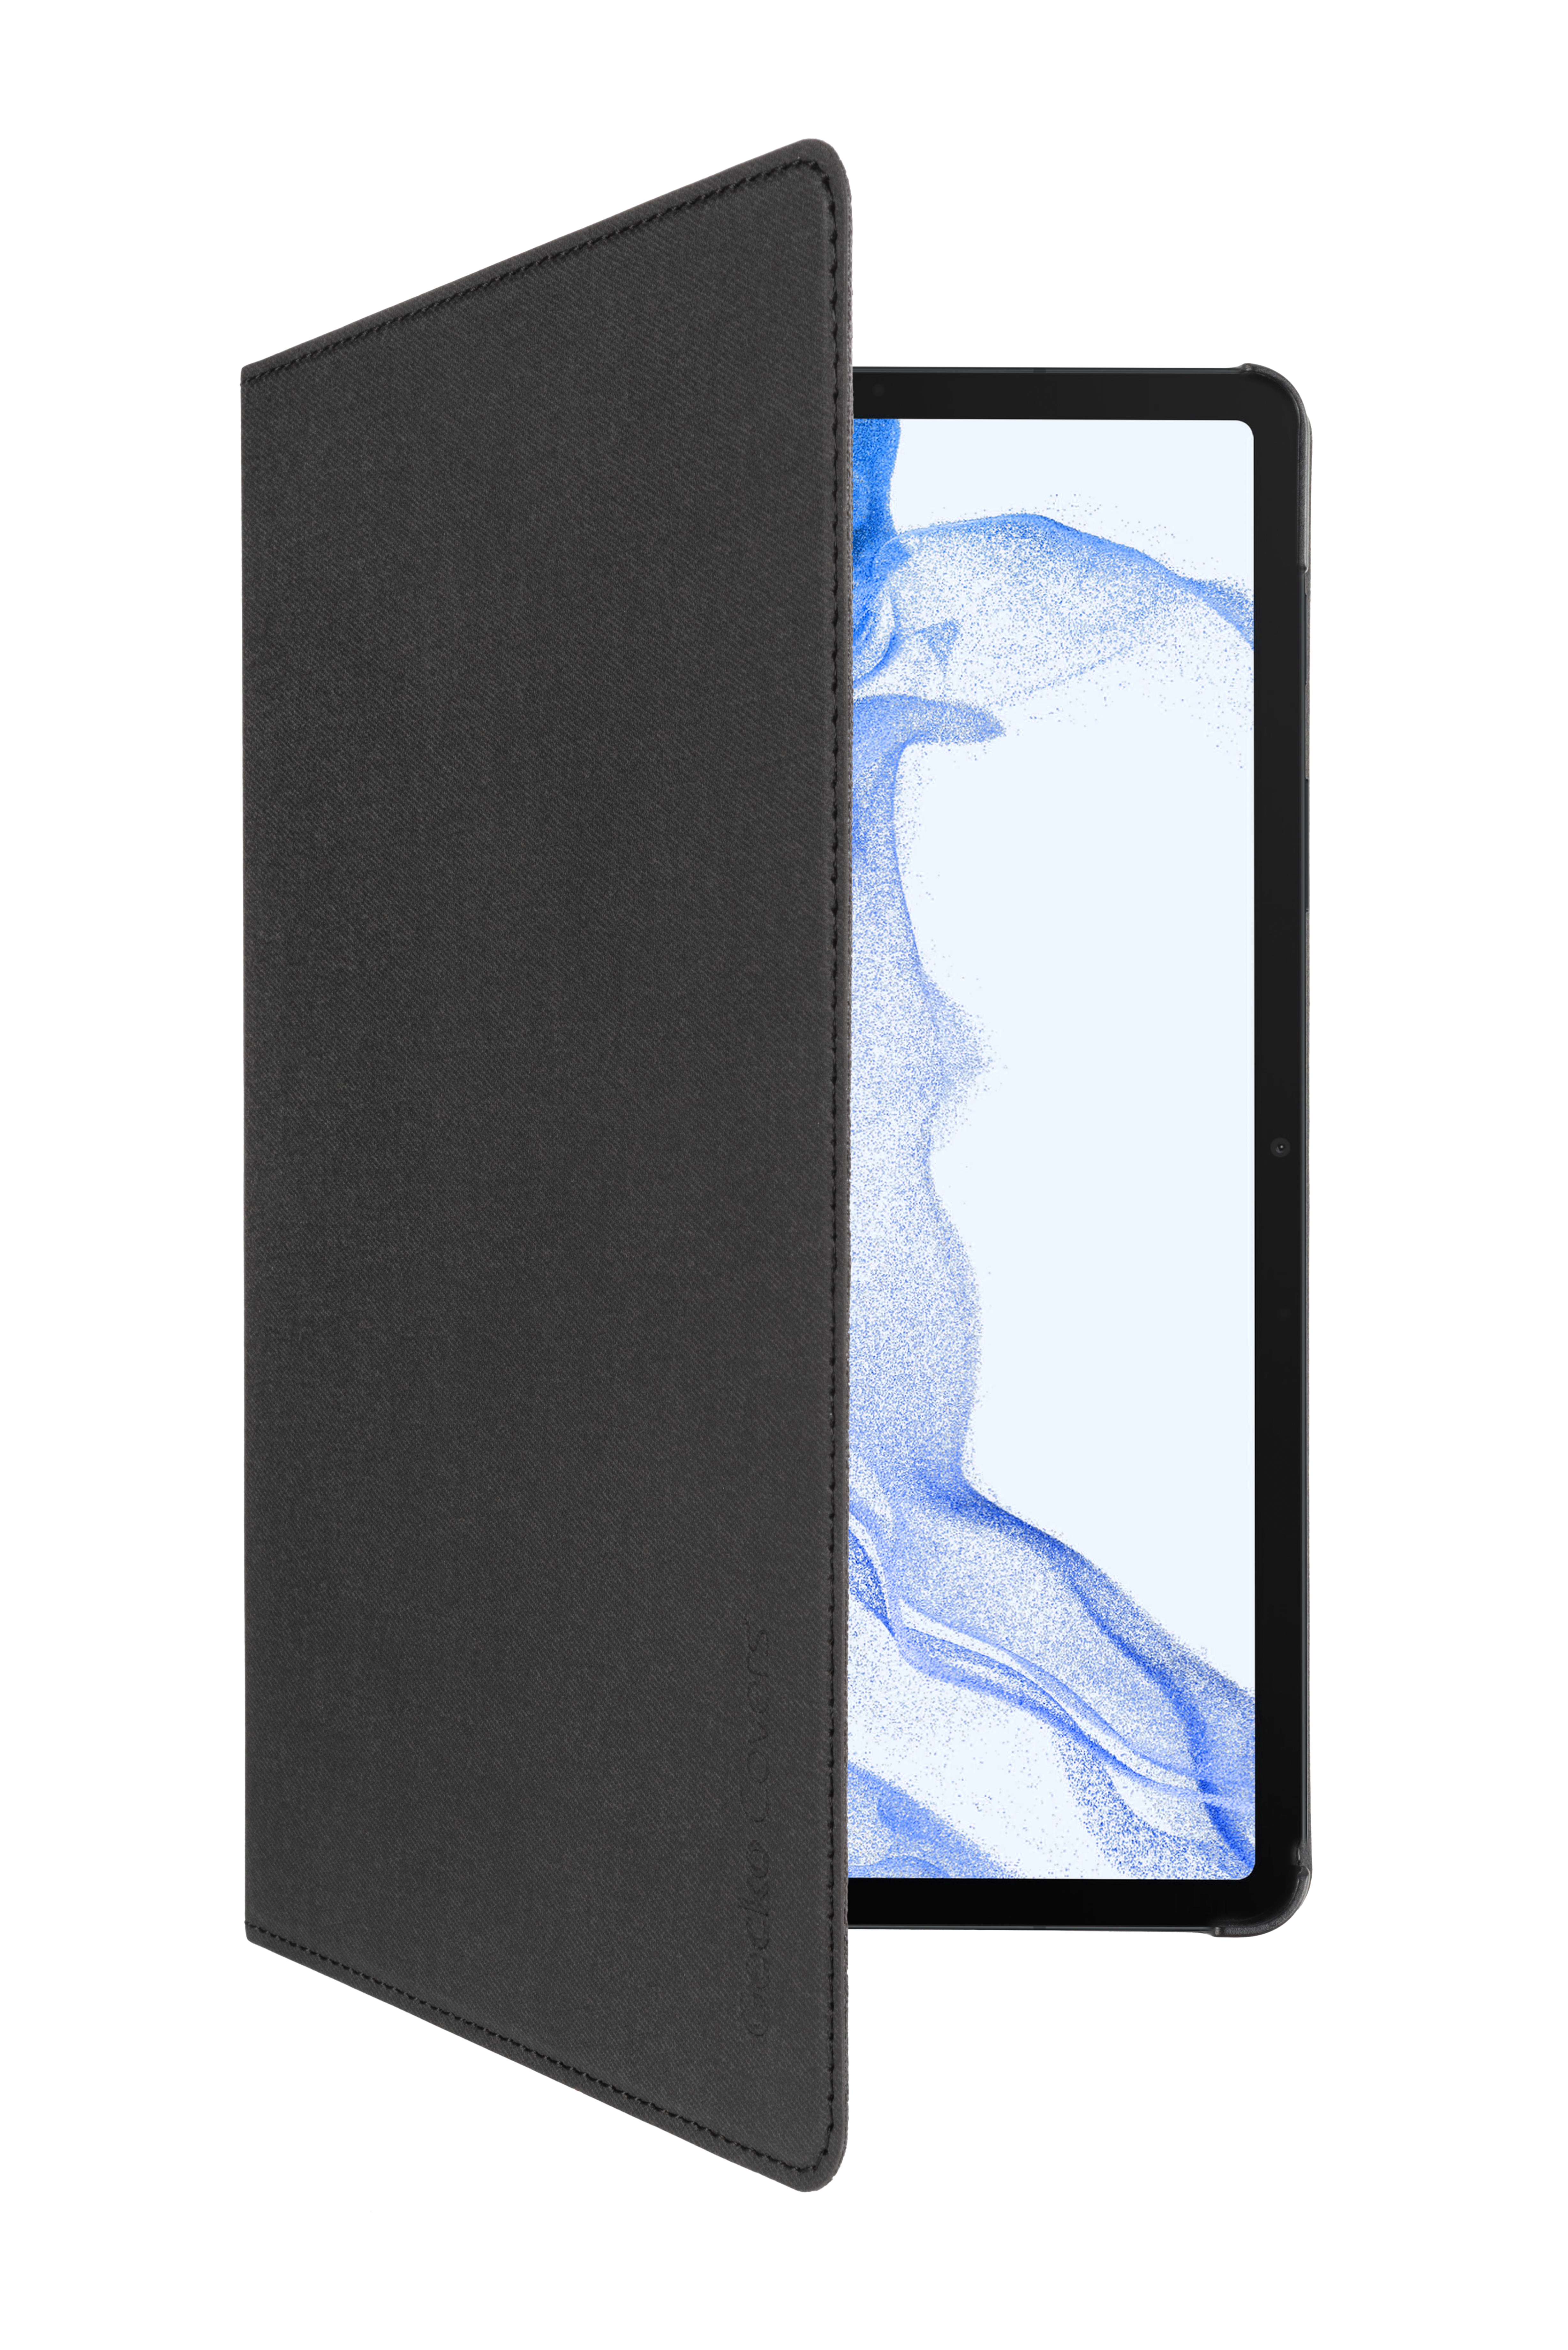 Samsung Tablet Bookcover Black 2.0 Hülle PU Leather, Easy-Click für COVERS GECKO